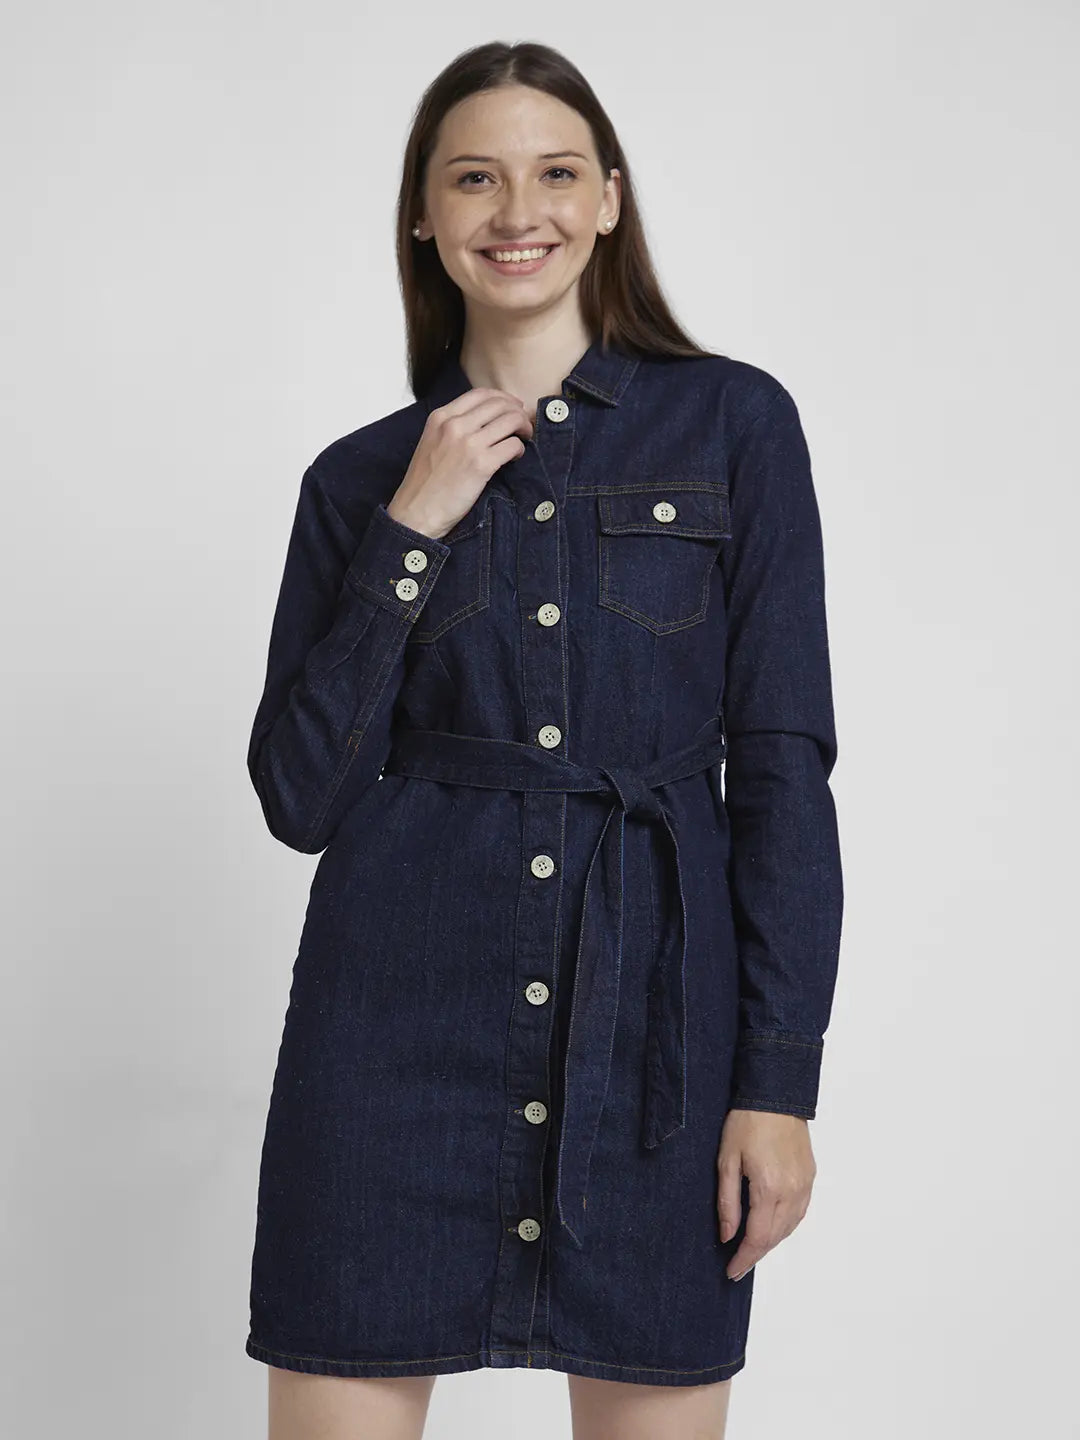 It was a simple denim chambray shirt dress with a tie at the waist.  Description from snowa… | Denim shirt dress outfit, Dresses with leggings,  Chambray dress outfit